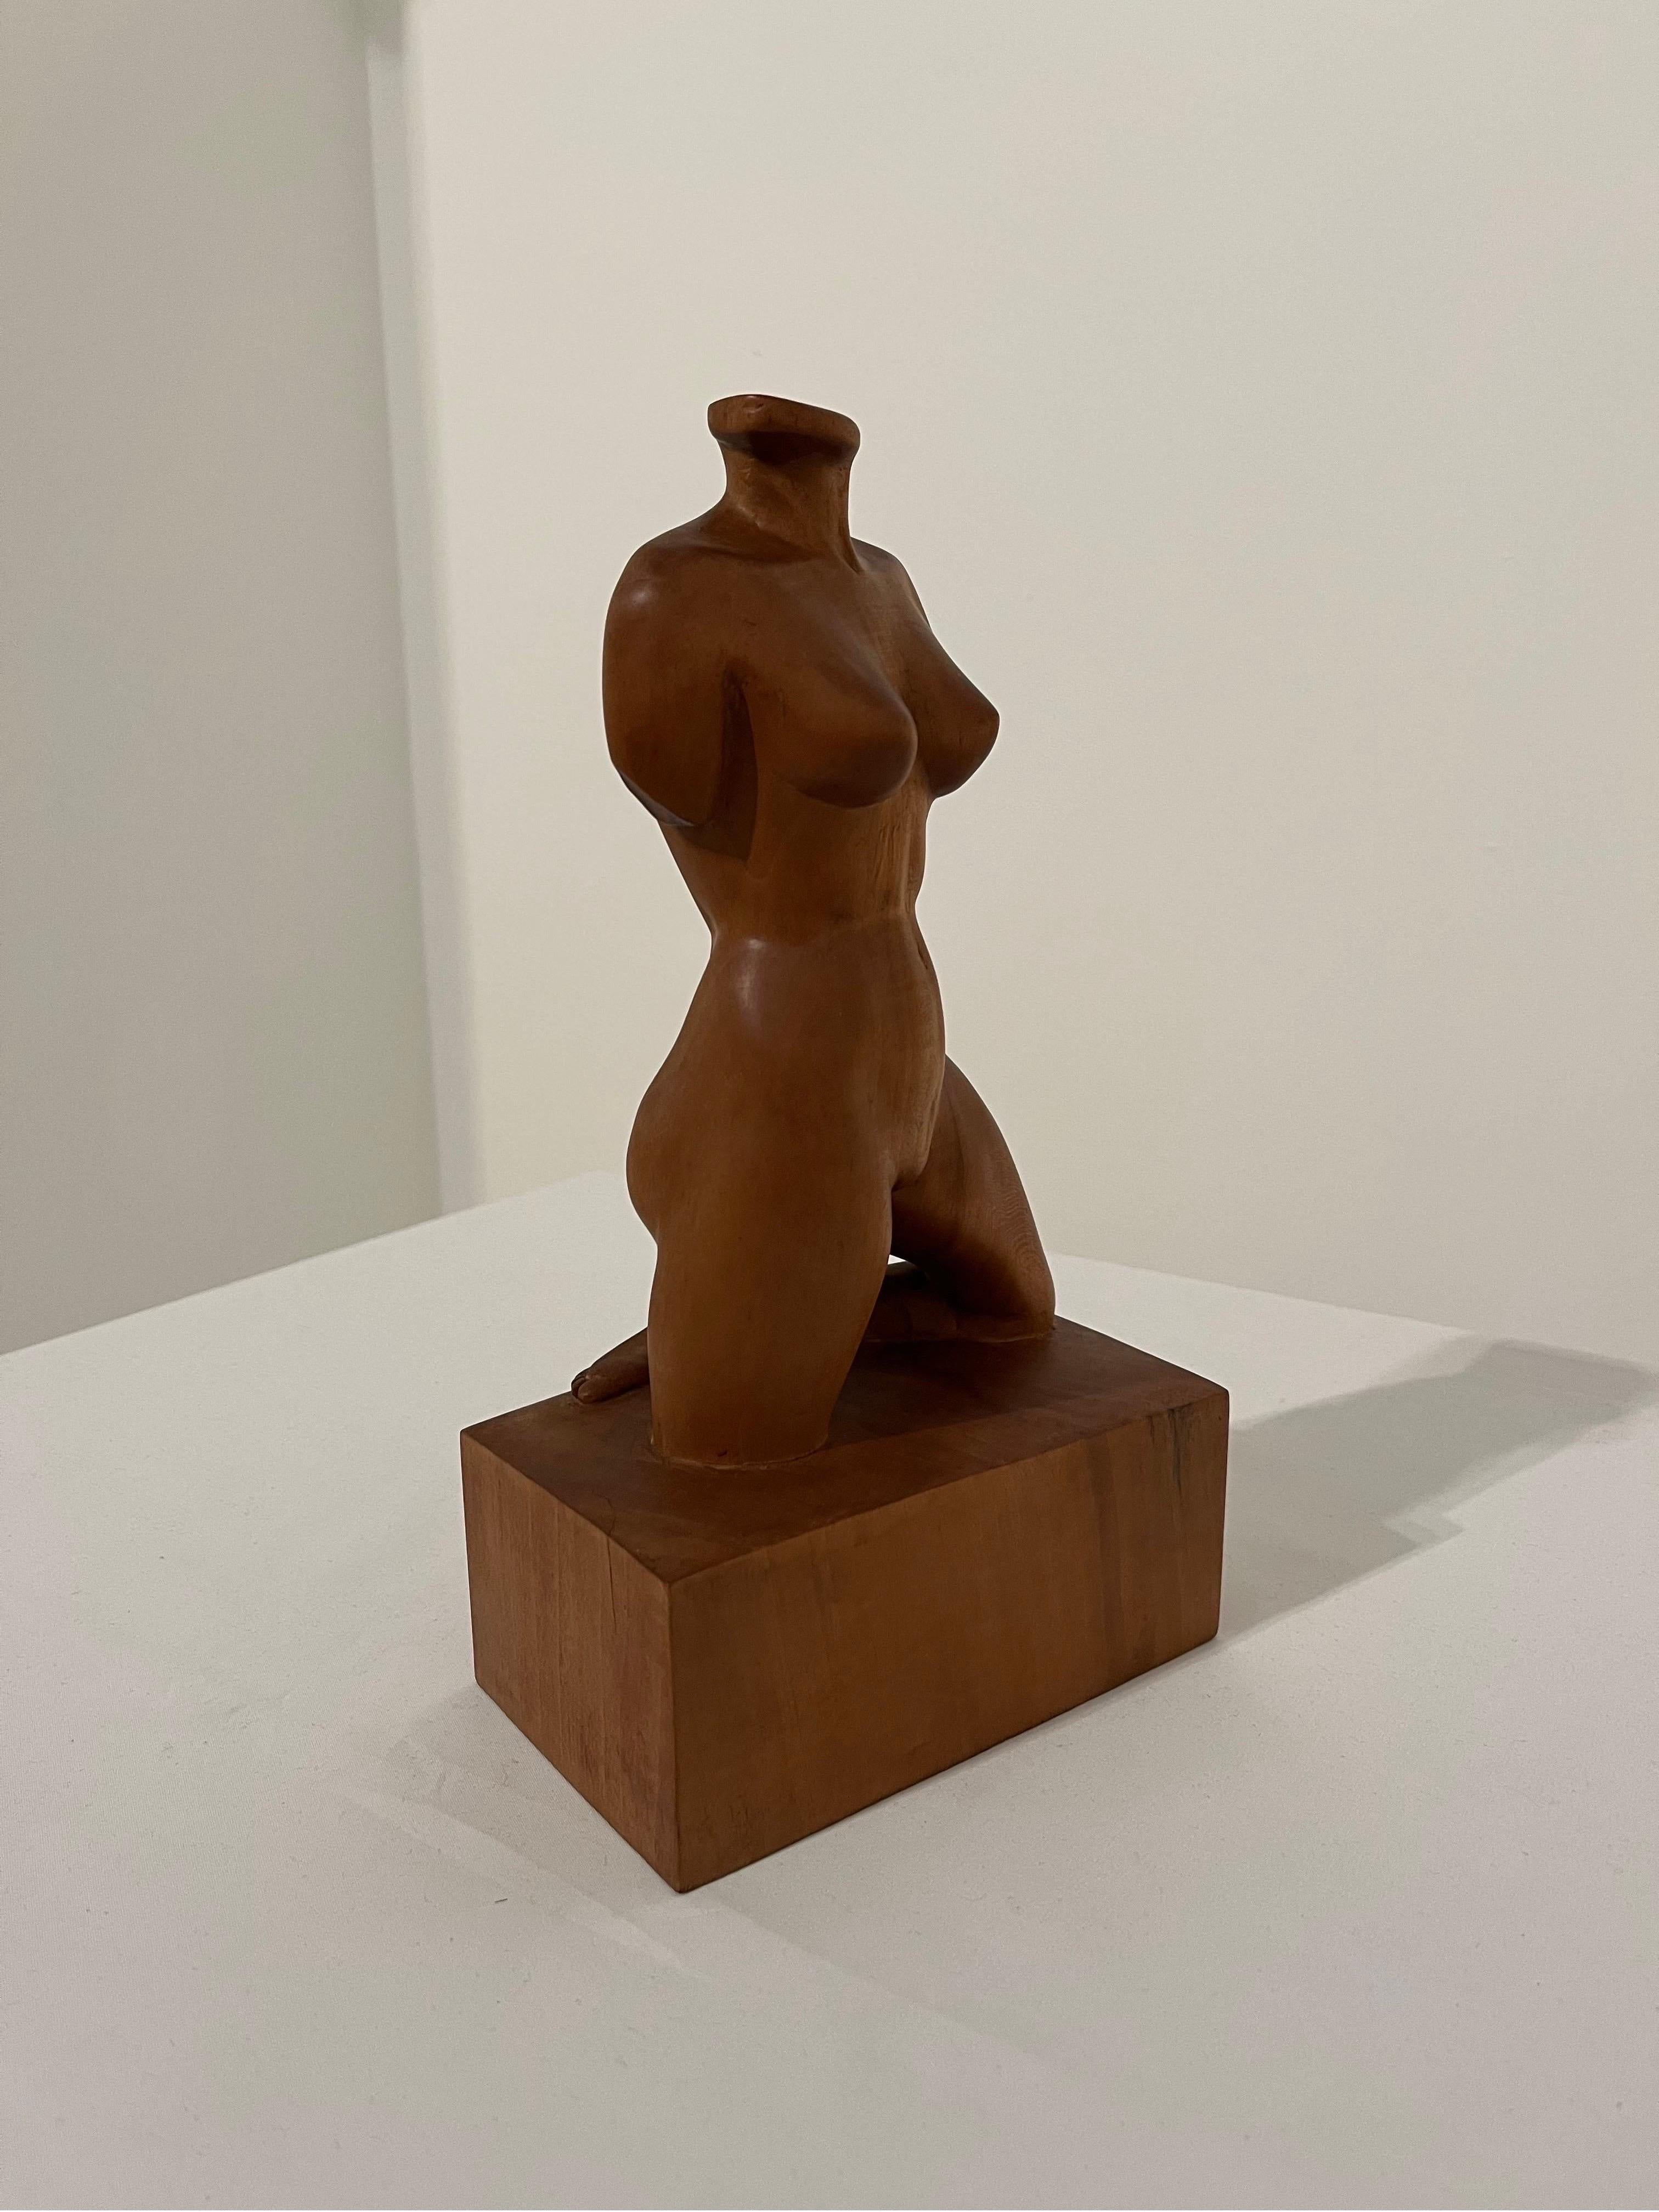 European Female Nude Figure Bust Wood Carving 1960s sculpture  For Sale